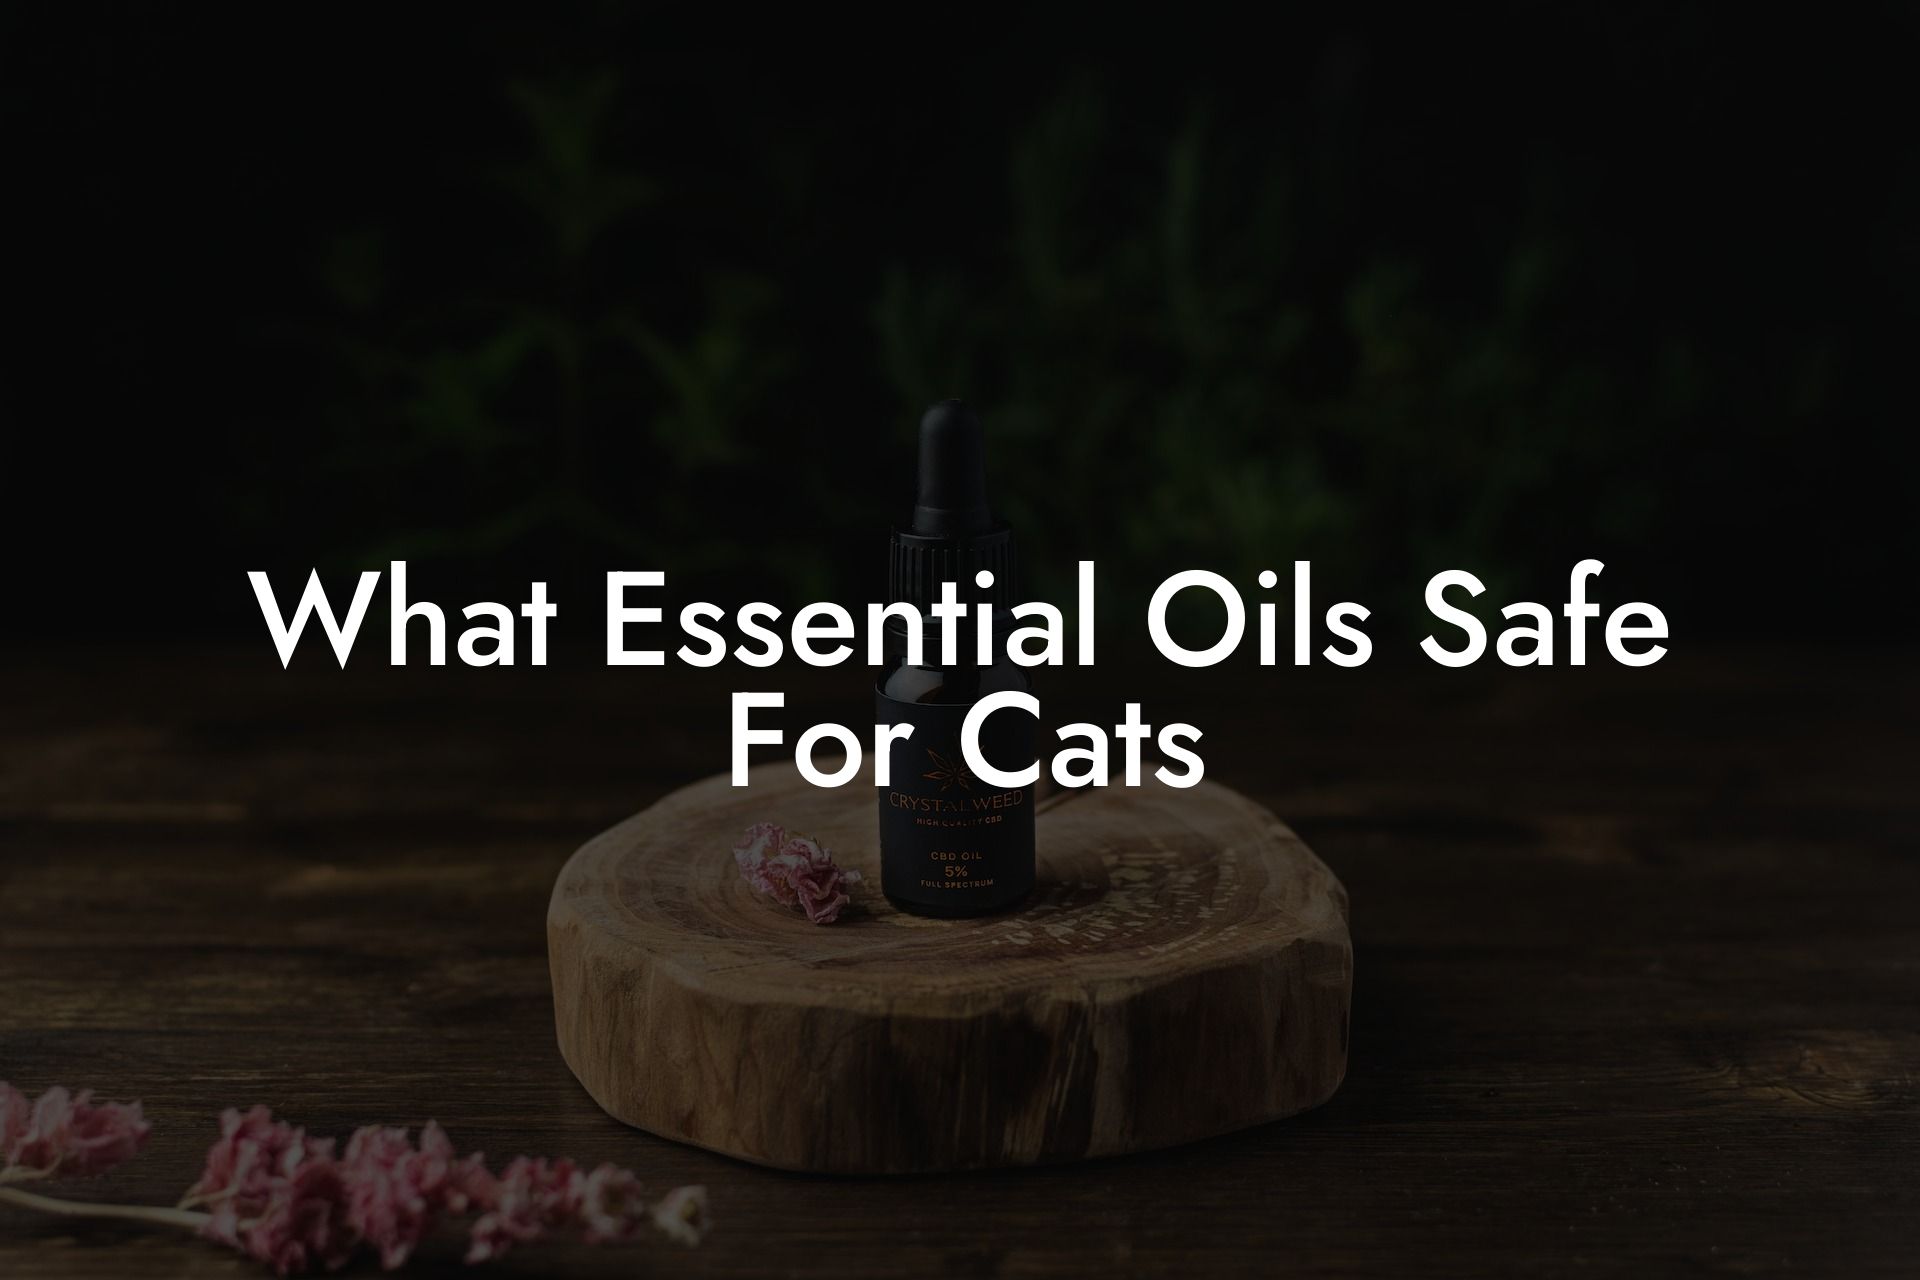 What Essential Oils Safe For Cats